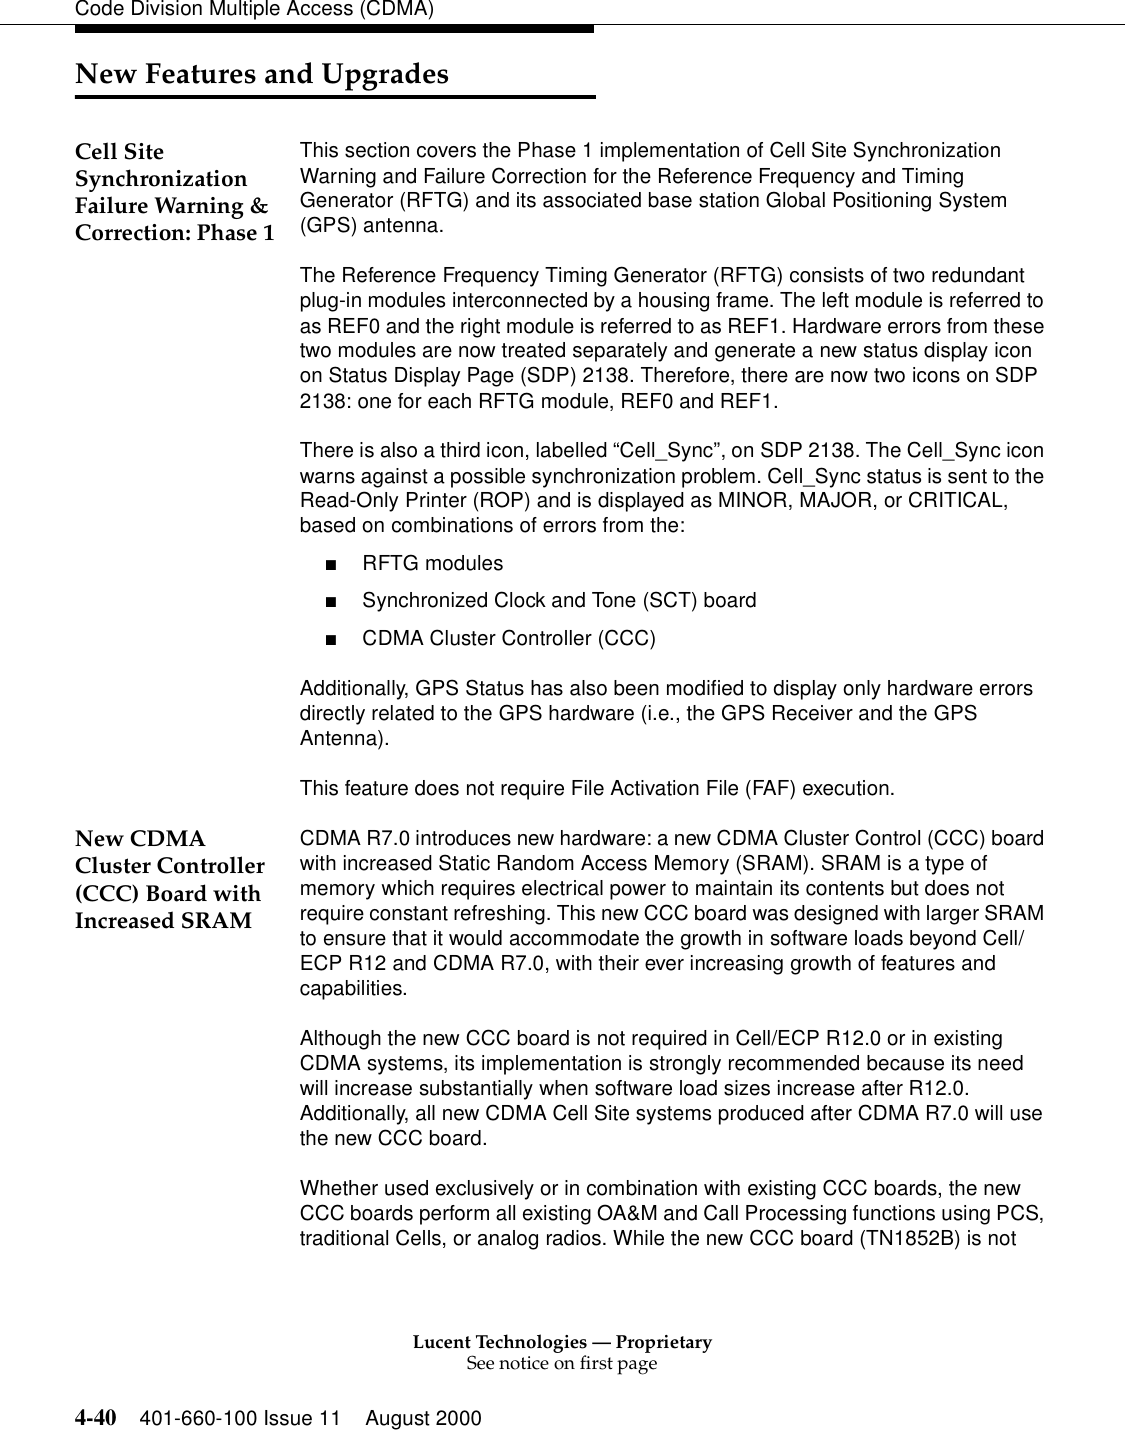 Lucent Technologies — ProprietarySee notice on first page4-40 401-660-100 Issue 11 August 2000Code Division Multiple Access (CDMA)New Features and UpgradesCell Site Synchronization Failure Warning &amp;Correction: Phase 1This section covers the Phase 1 implementation of Cell Site Synchronization Warning and Failure Correction for the Reference Frequency and Timing Generator (RFTG) and its associated base station Global Positioning System (GPS) antenna.The Reference Frequency Timing Generator (RFTG) consists of two redundant plug-in modules interconnected by a housing frame. The left module is referred to as REF0 and the right module is referred to as REF1. Hardware errors from these two modules are now treated separately and generate a new status display icon on Status Display Page (SDP) 2138. Therefore, there are now two icons on SDP 2138: one for each RFTG module, REF0 and REF1.There is also a third icon, labelled “Cell_Sync”, on SDP 2138. The Cell_Sync icon warns against a possible synchronization problem. Cell_Sync status is sent to the Read-Only Printer (ROP) and is displayed as MINOR, MAJOR, or CRITICAL, based on combinations of errors from the:■RFTG modules■Synchronized Clock and Tone (SCT) board■CDMA Cluster Controller (CCC)Additionally, GPS Status has also been modified to display only hardware errors directly related to the GPS hardware (i.e., the GPS Receiver and the GPS Antenna). This feature does not require File Activation File (FAF) execution.New CDMA Cluster Controller (CCC) Board with Increased SRAMCDMA R7.0 introduces new hardware: a new CDMA Cluster Control (CCC) board with increased Static Random Access Memory (SRAM). SRAM is a type of memory which requires electrical power to maintain its contents but does not require constant refreshing. This new CCC board was designed with larger SRAM to ensure that it would accommodate the growth in software loads beyond Cell/ECP R12 and CDMA R7.0, with their ever increasing growth of features and capabilities.Although the new CCC board is not required in Cell/ECP R12.0 or in existing CDMA systems, its implementation is strongly recommended because its need will increase substantially when software load sizes increase after R12.0. Additionally, all new CDMA Cell Site systems produced after CDMA R7.0 will use the new CCC board.Whether used exclusively or in combination with existing CCC boards, the new CCC boards perform all existing OA&amp;M and Call Processing functions using PCS, traditional Cells, or analog radios. While the new CCC board (TN1852B) is not 